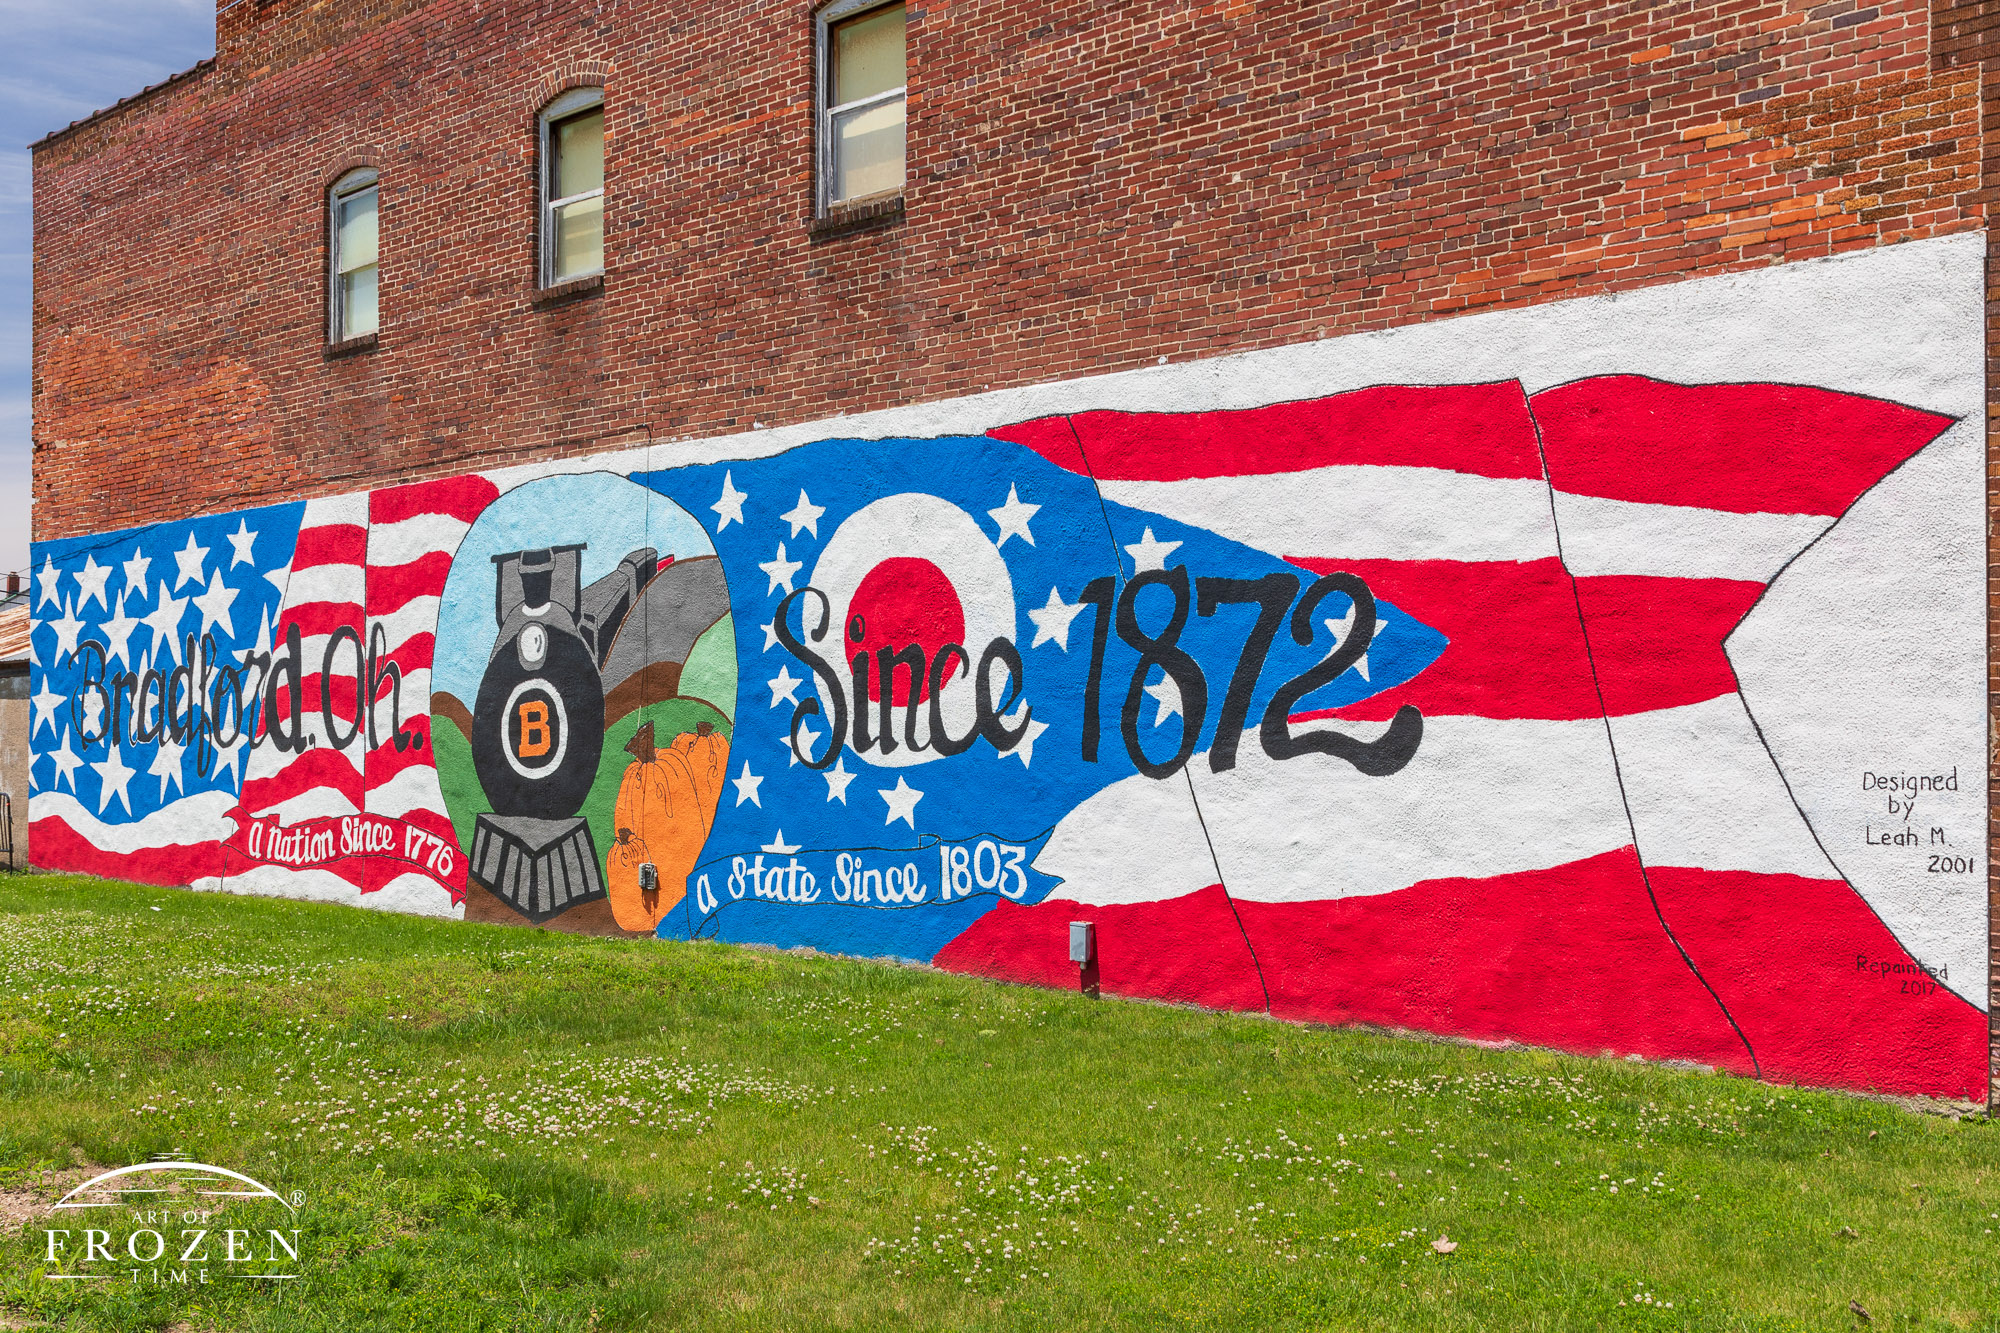 A red, white and blue mural installed on the side of a red-brick building celebrating Bradford Ohio’s railroad heritage.